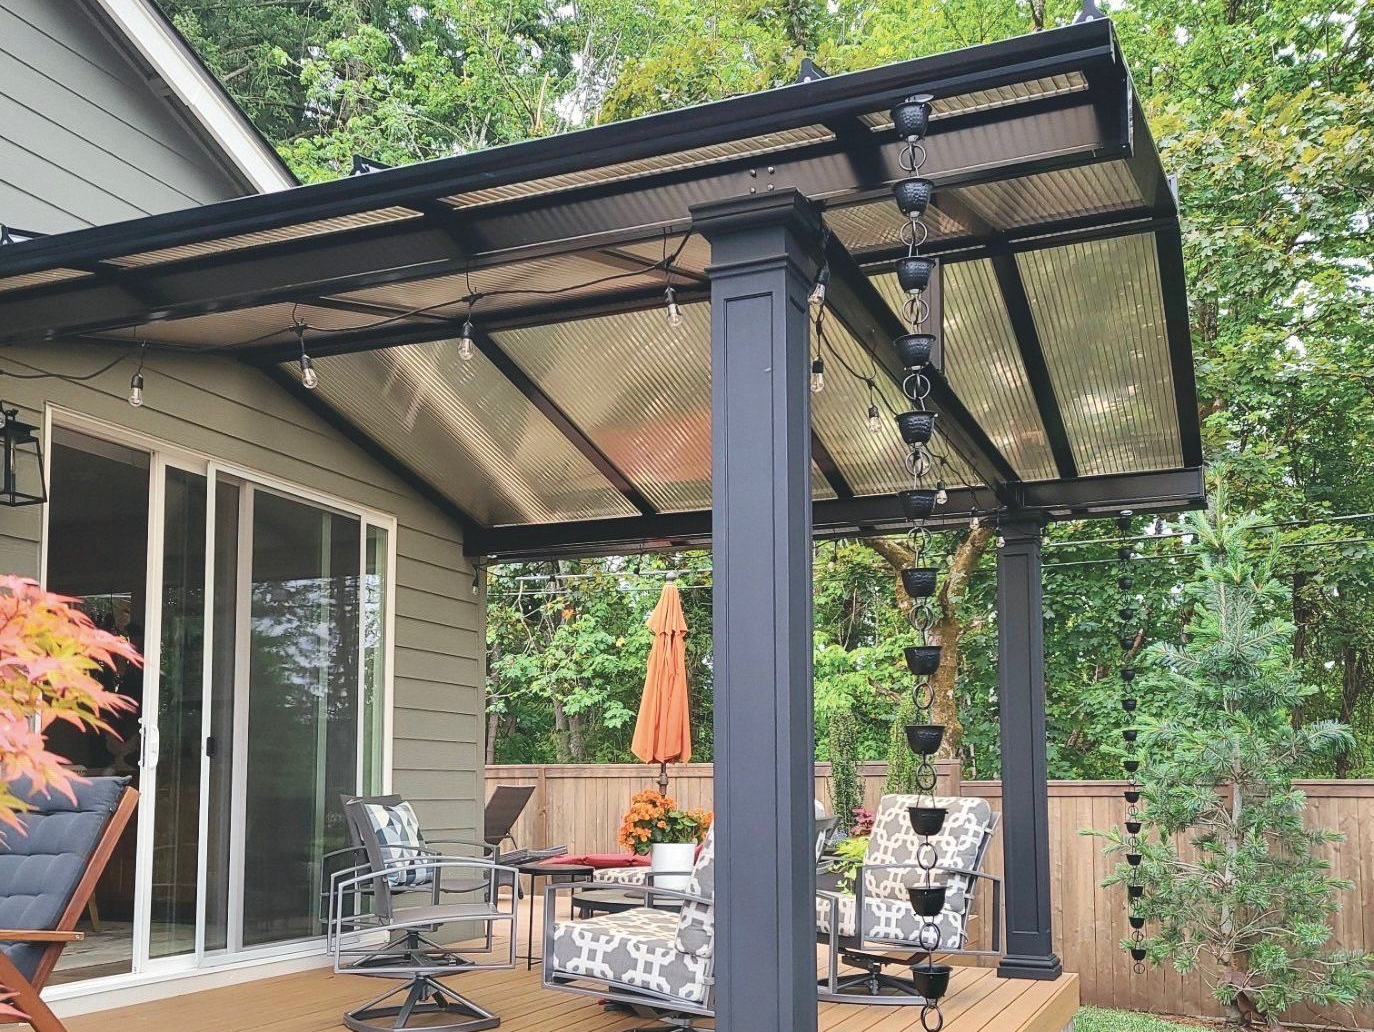 Patio Covers in Beaverton Oregon - Gable Roof with ACRYLITE Acrylic